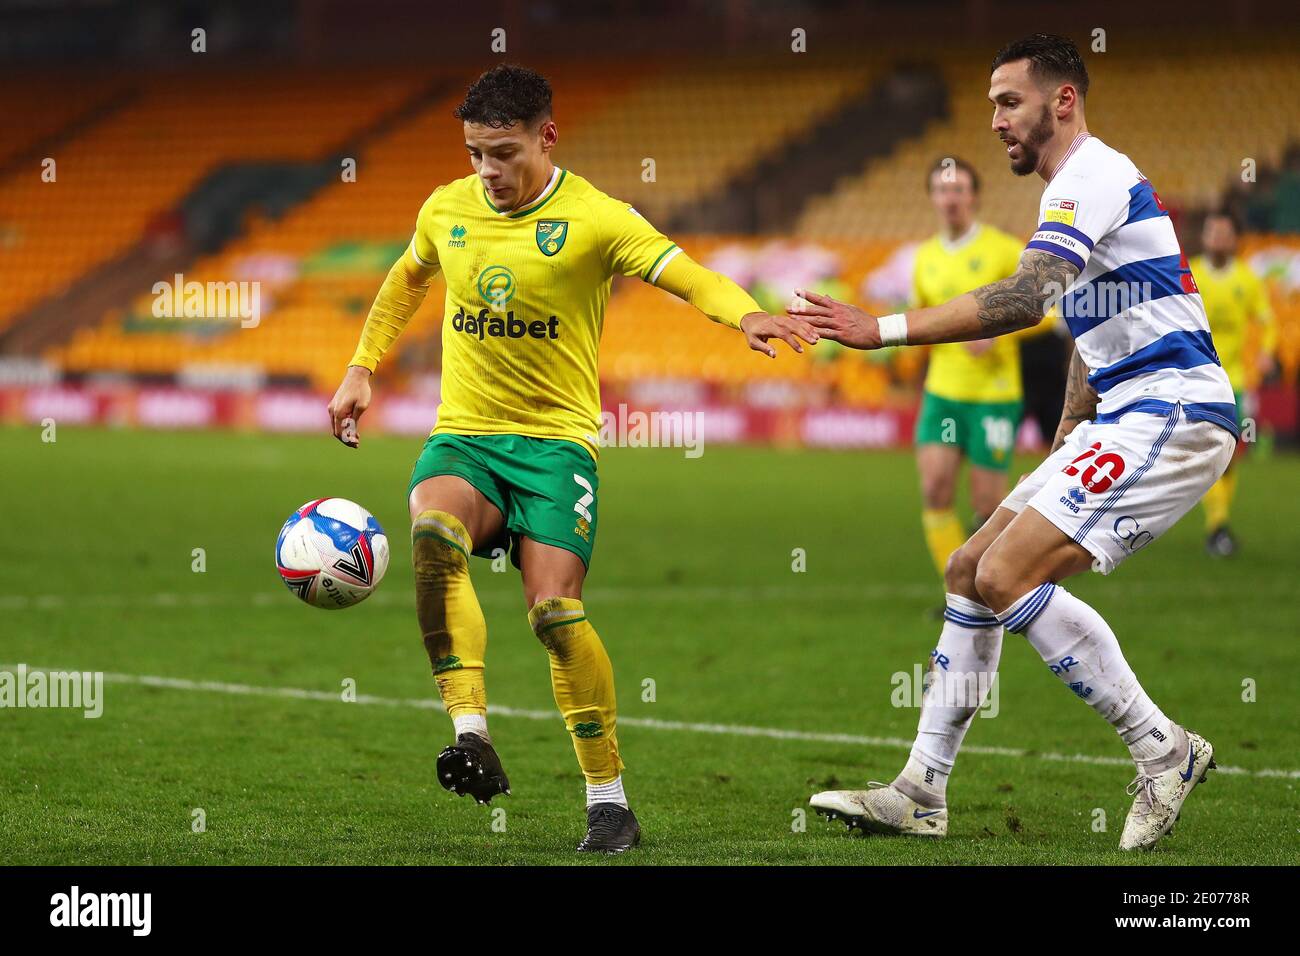 Max Aarons of Norwich City and Geoff Cameron of Queens Park Rangers in action - Norwich City v Queens Park Rangers, Sky Bet Championship, Carrow Road, Norwich, UK - 29th December 2020  Editorial Use Only - DataCo restrictions apply Stock Photo